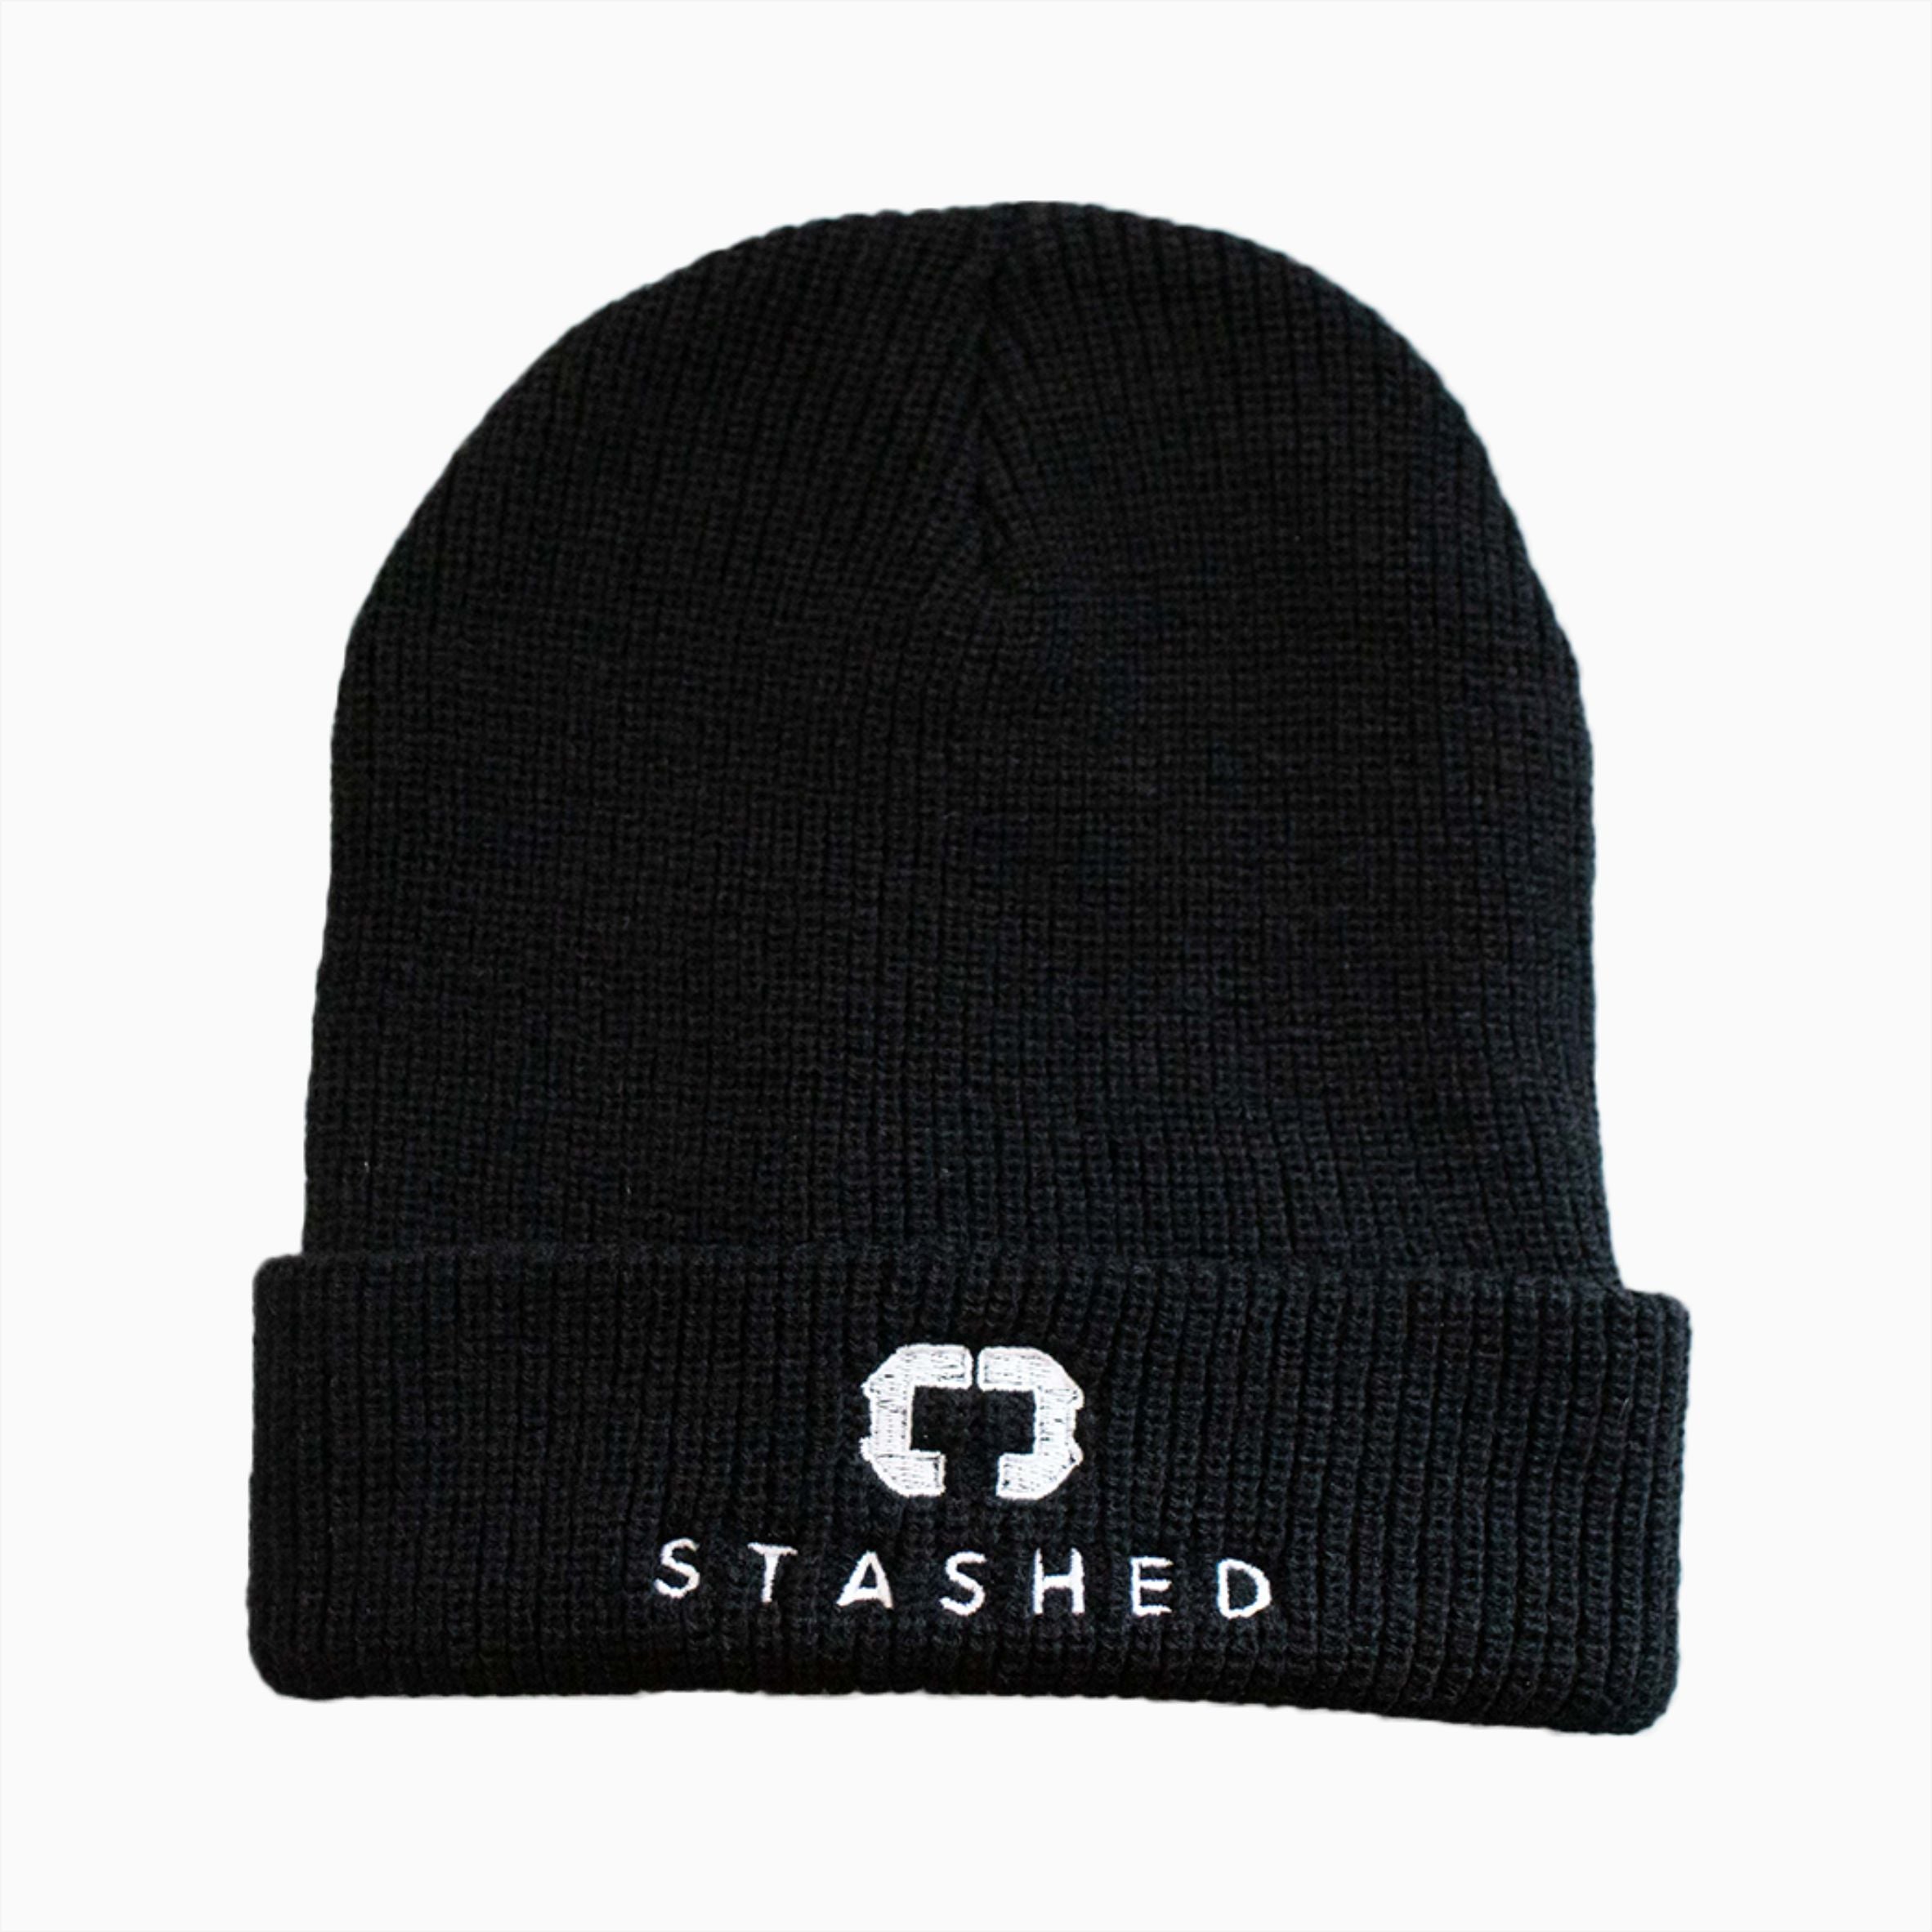 Stashed Products Beanie Hat